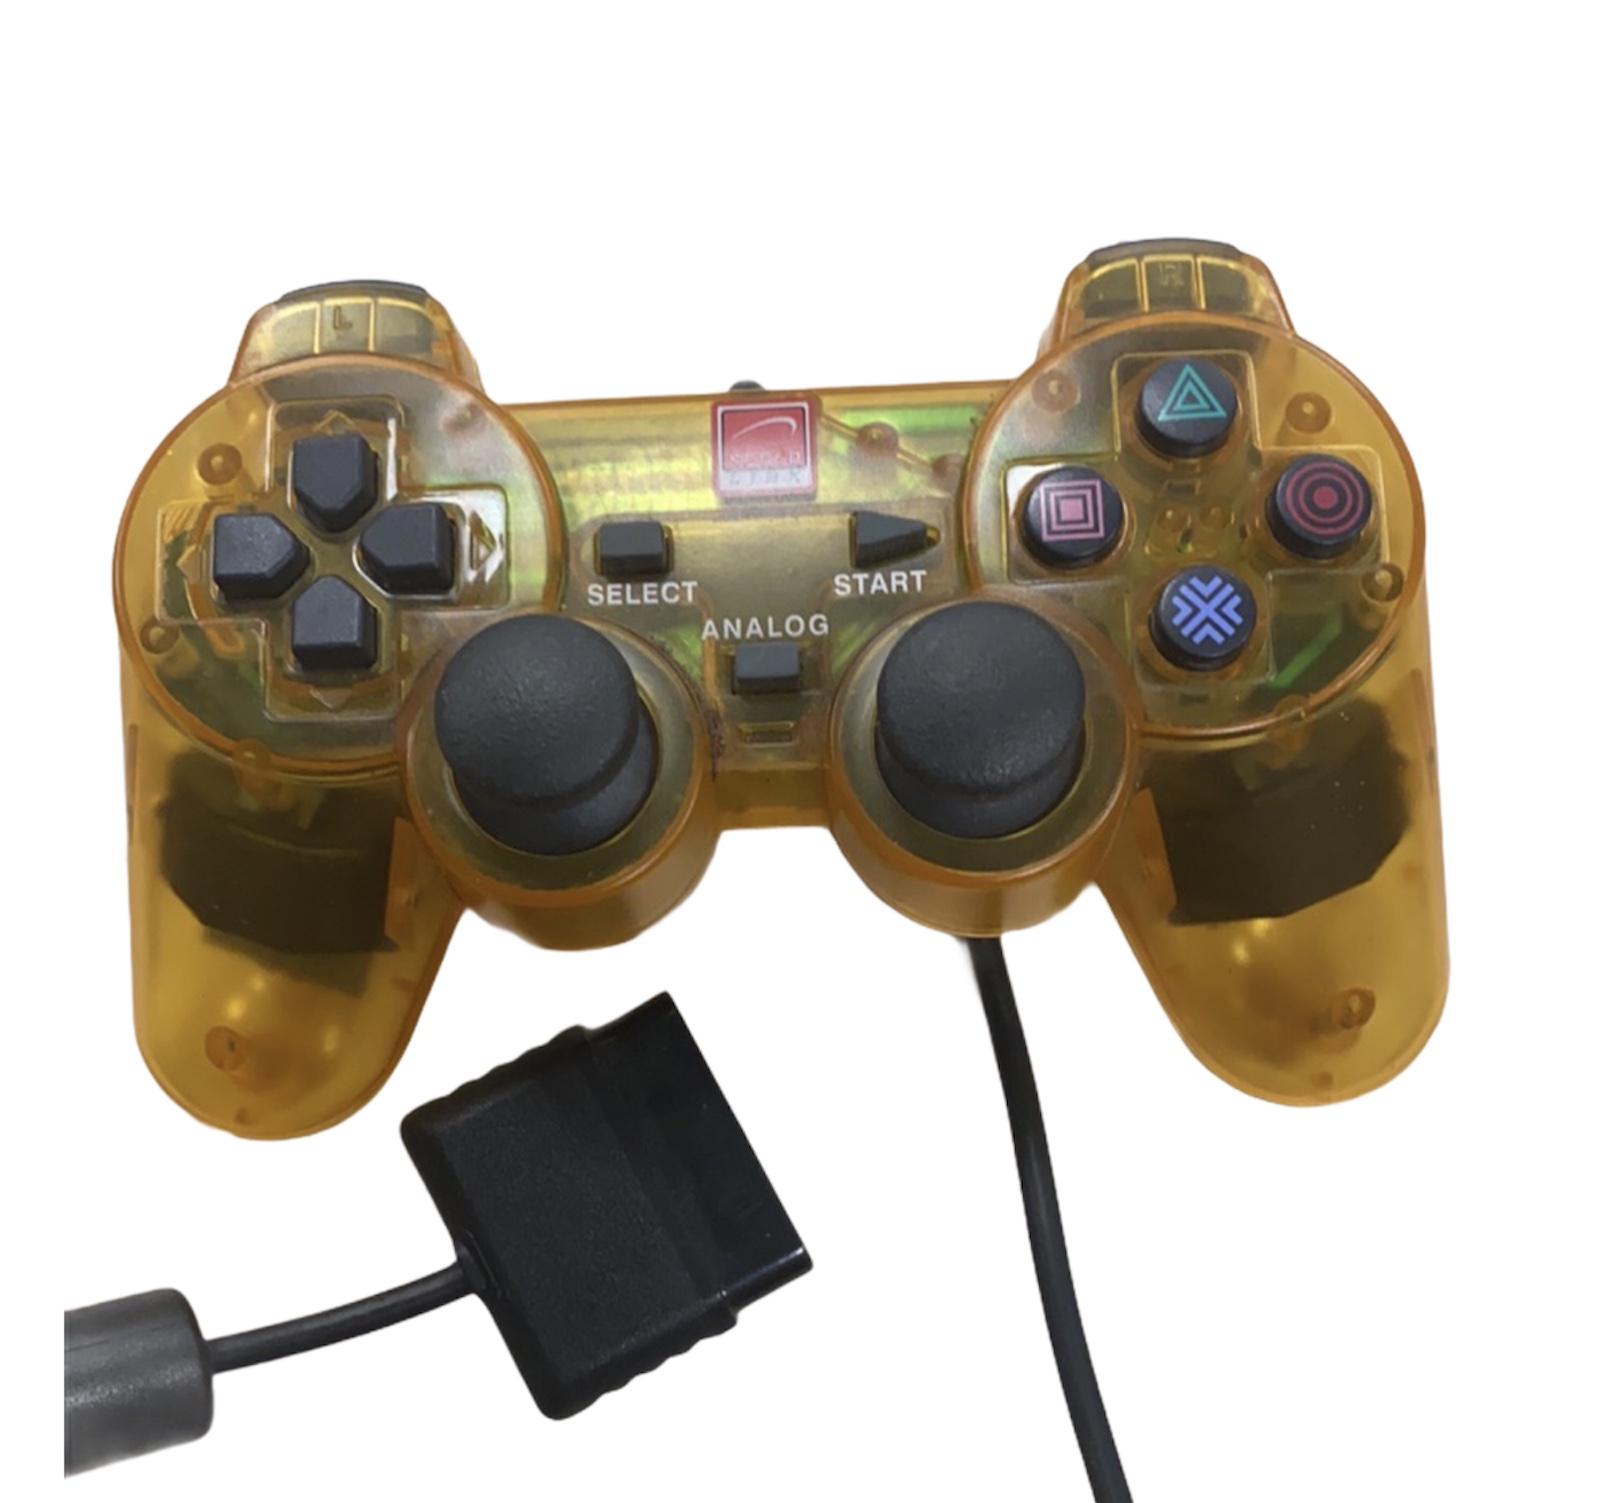 SpeedLink PlayStation 2 Wired Controller (Crystal Yellow)